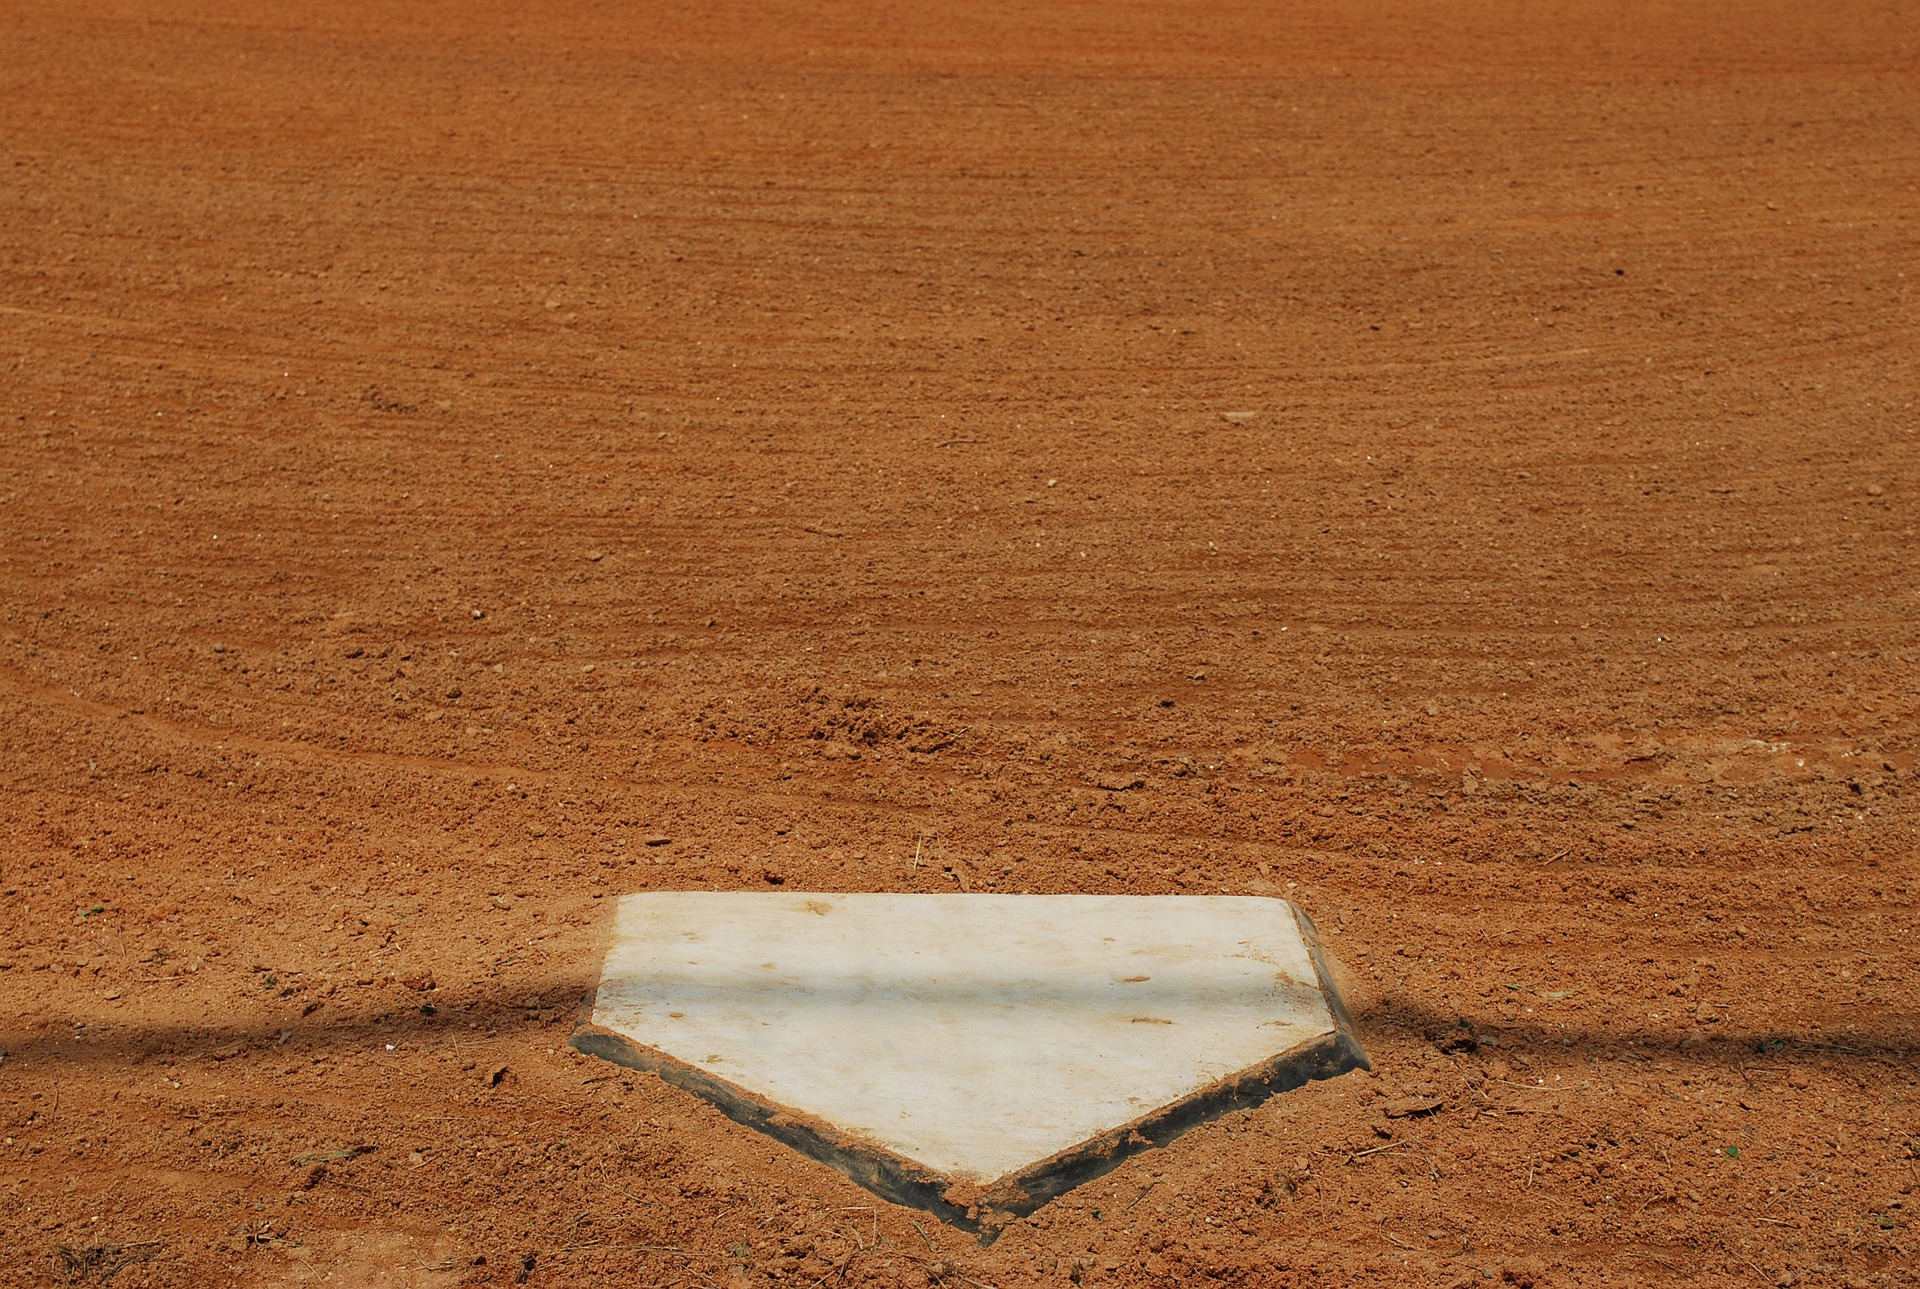 A wide shot of home plate at a baseball field